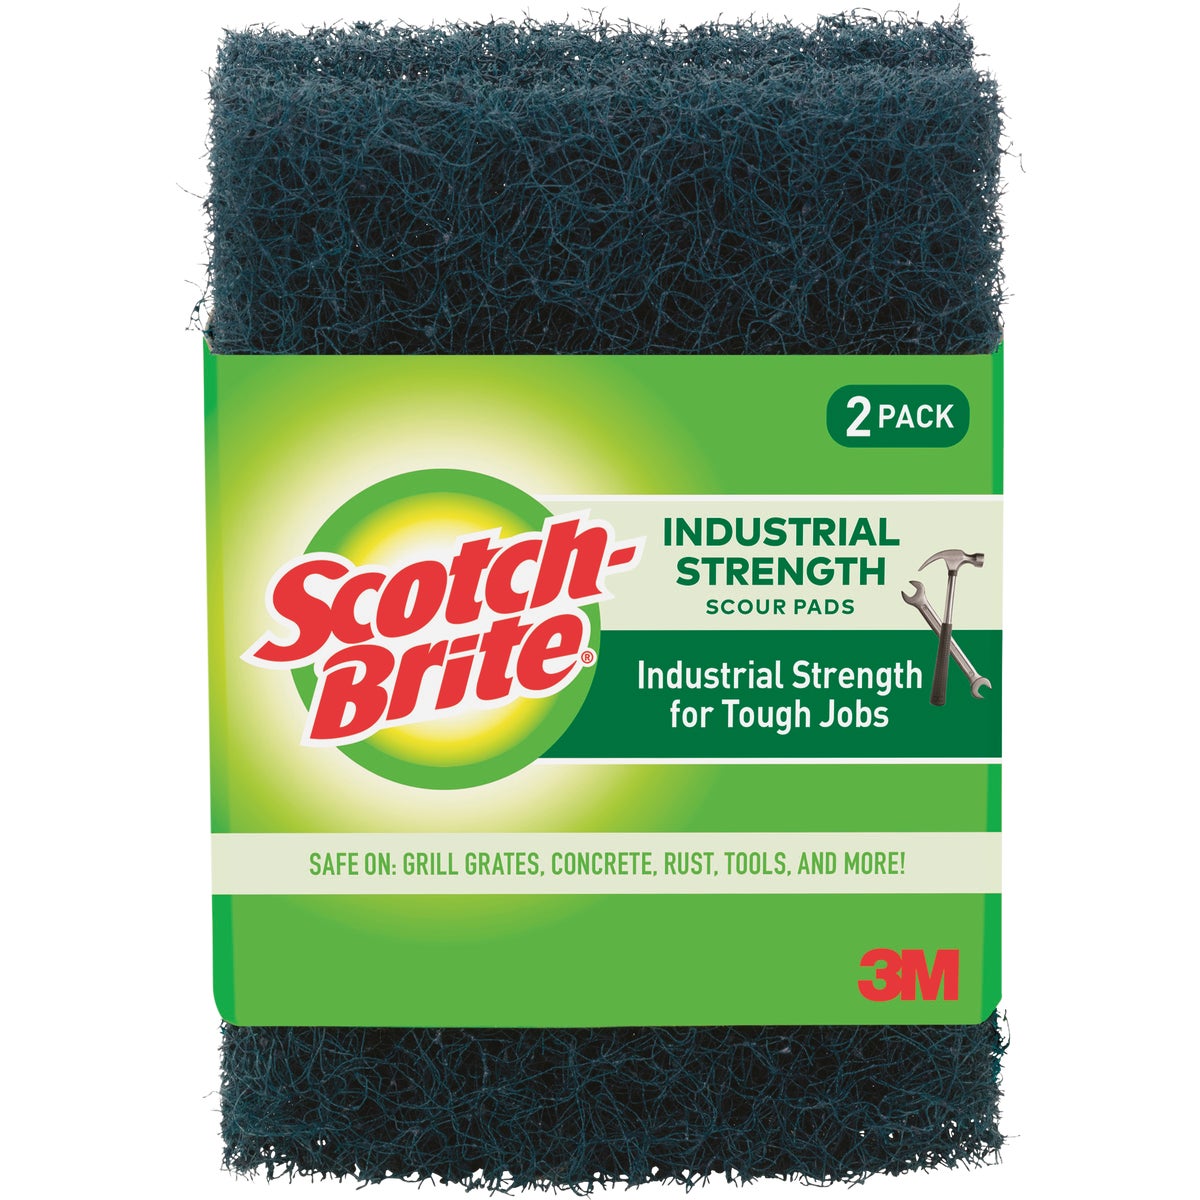 Scotch-Brite Industrial Strength Scouring Pad (2-Count)